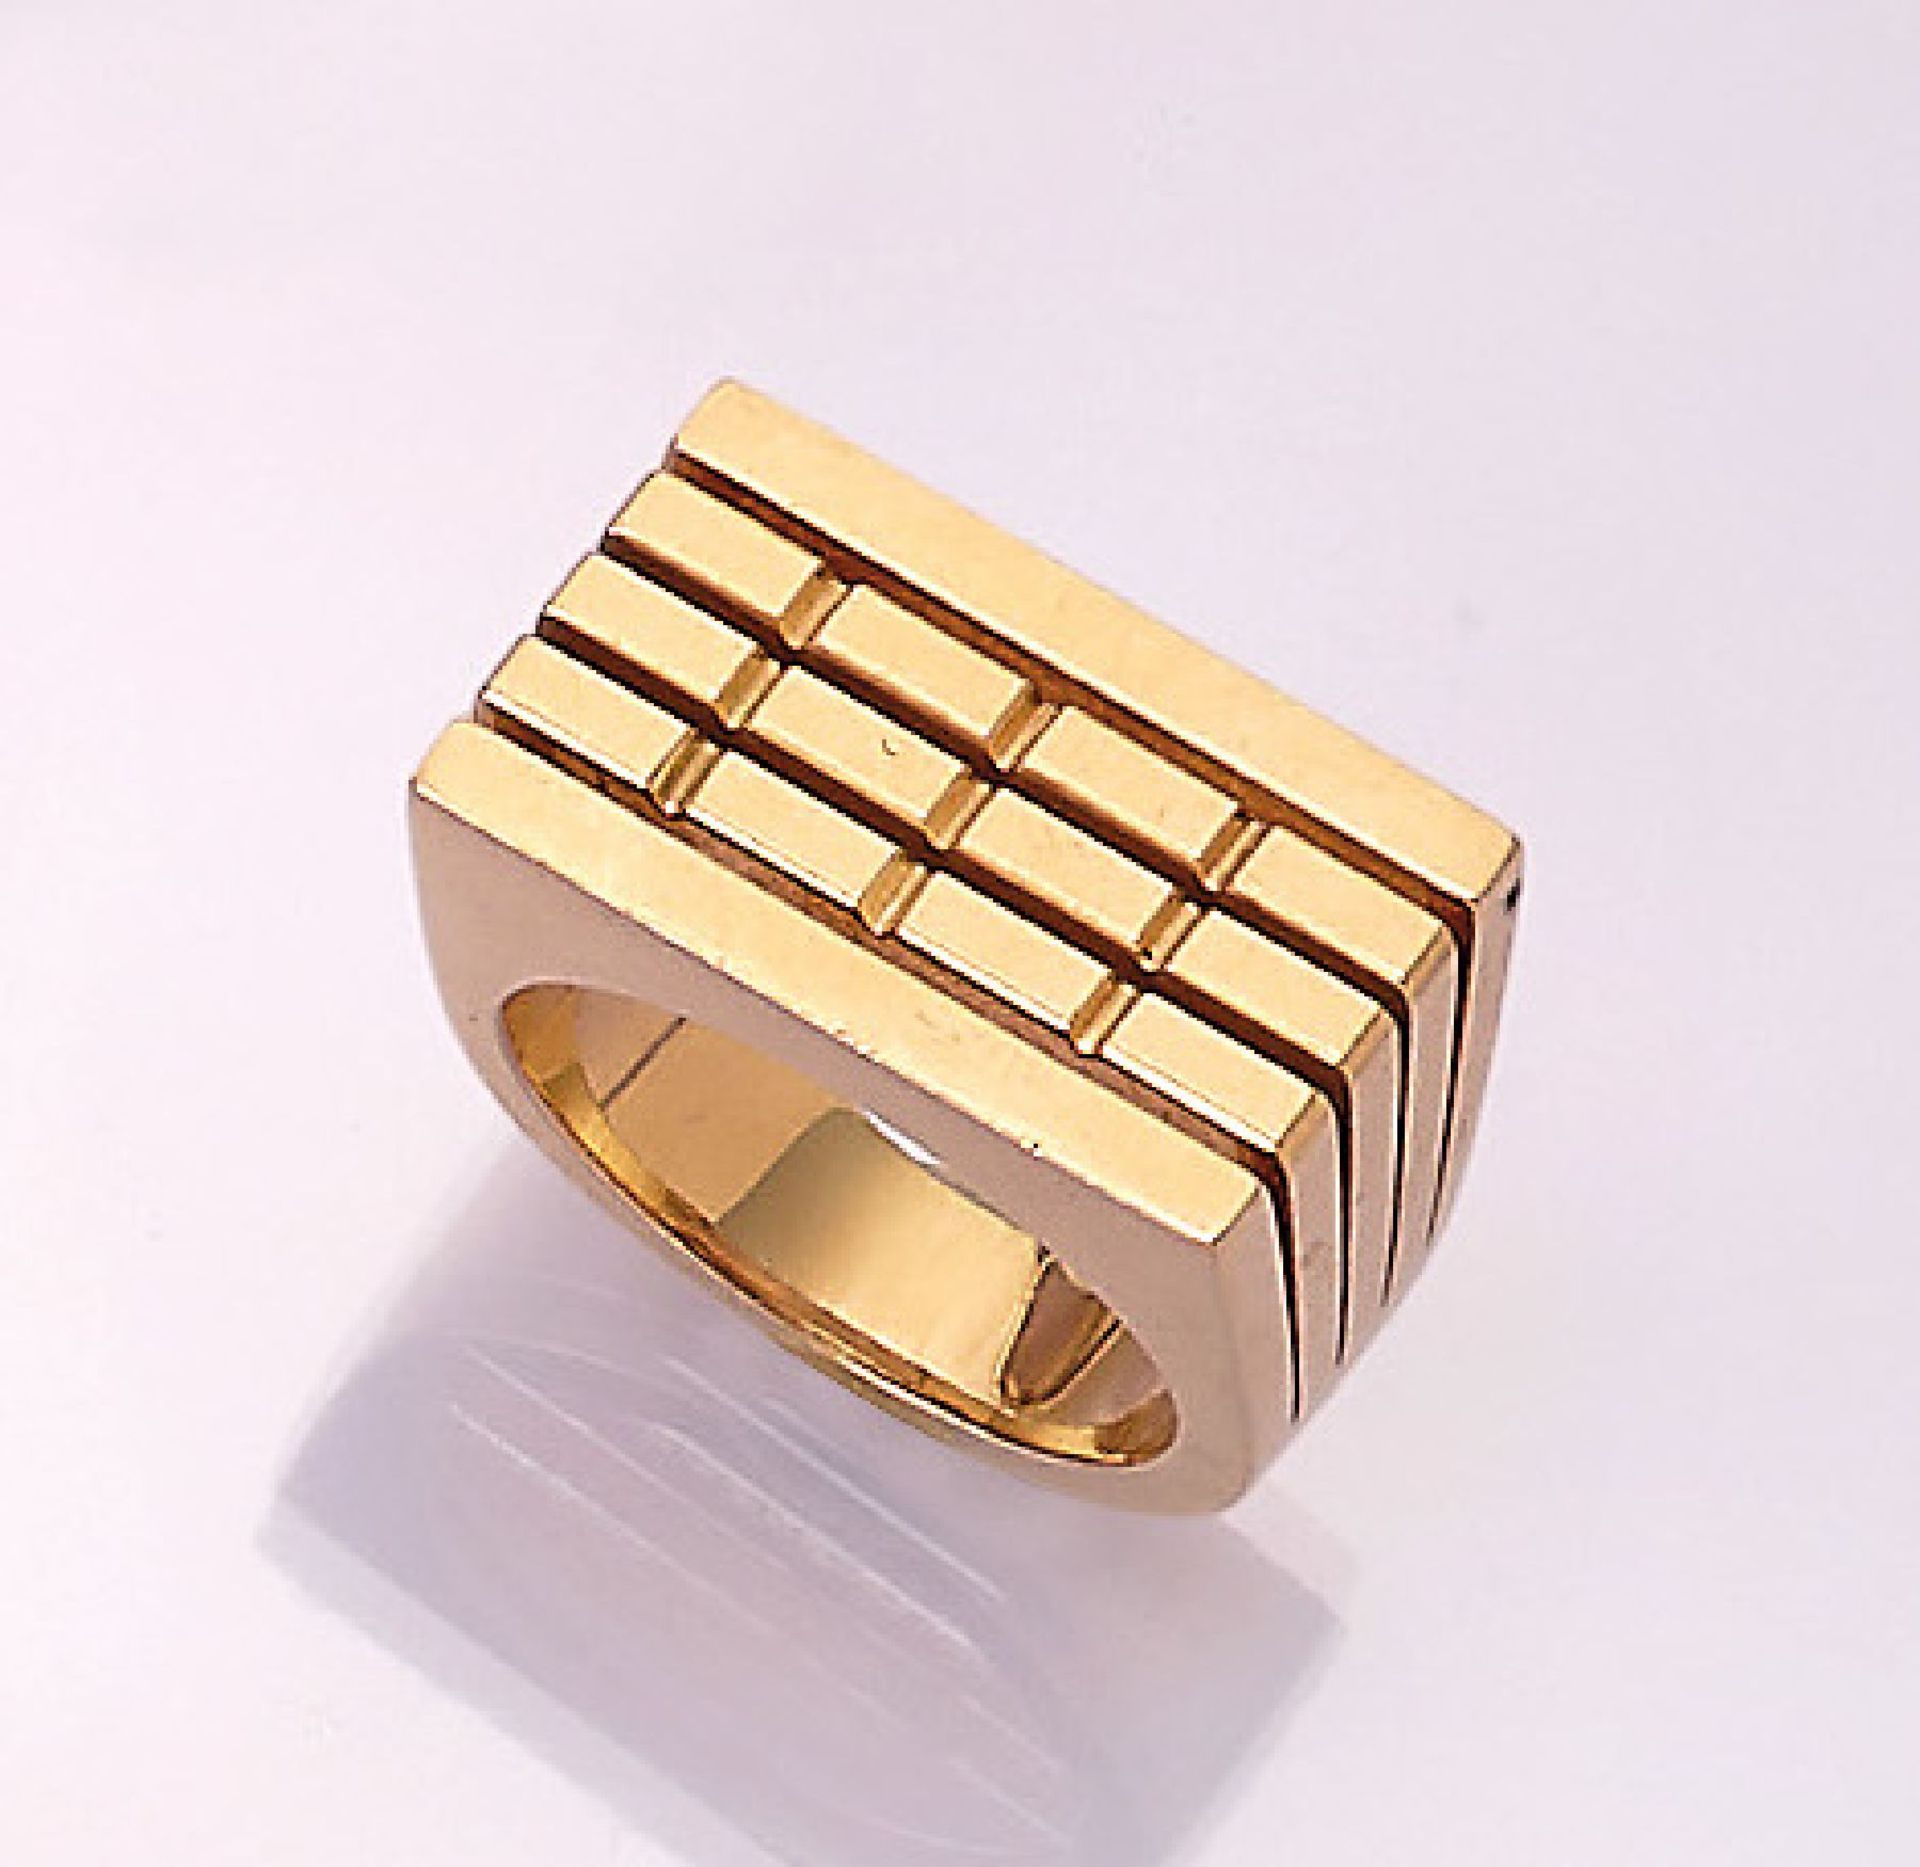 18 kt gold PIAGET ring , YG 750/000, unusualdesign, ring head and shoulders with fret workand 5-fold